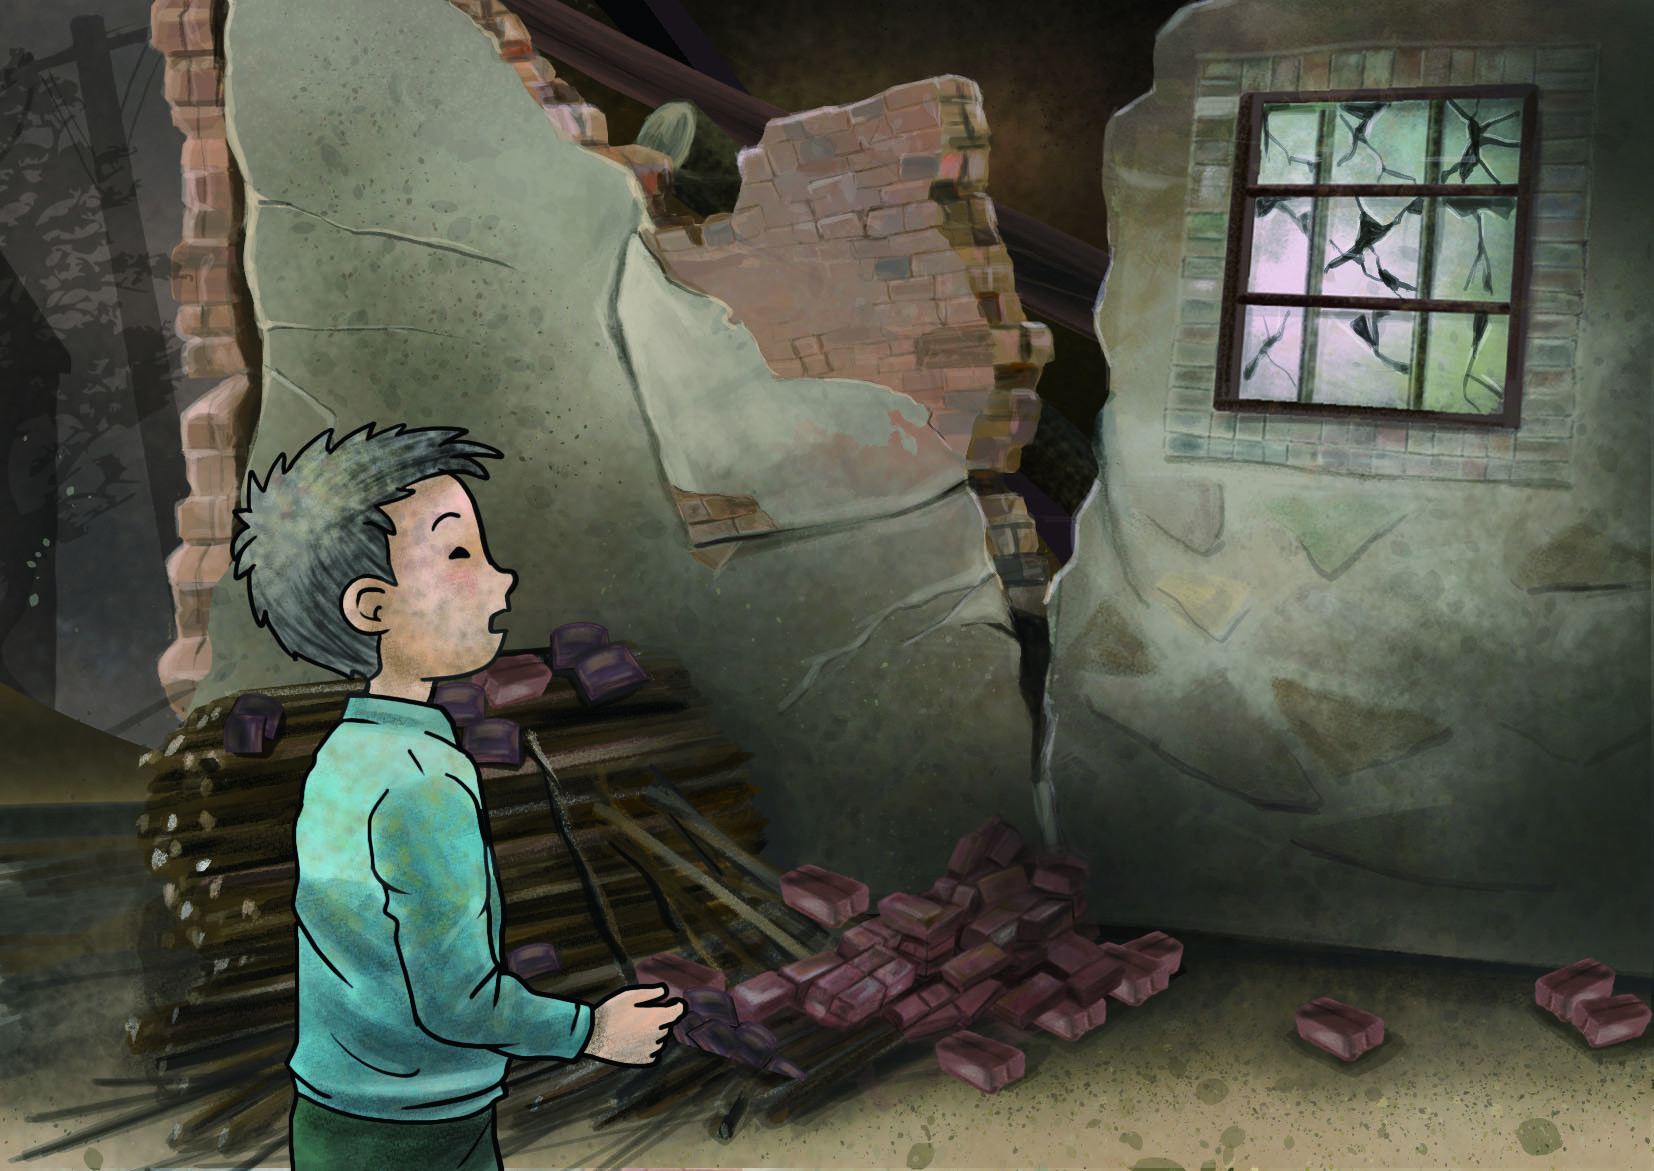 Xiaoshuai finds his house destroyed by an earthquake – an illustration from PAGER-O project&#039;s earthquake resilience scenario narrative. Illustrator: Siu Kuen Lai